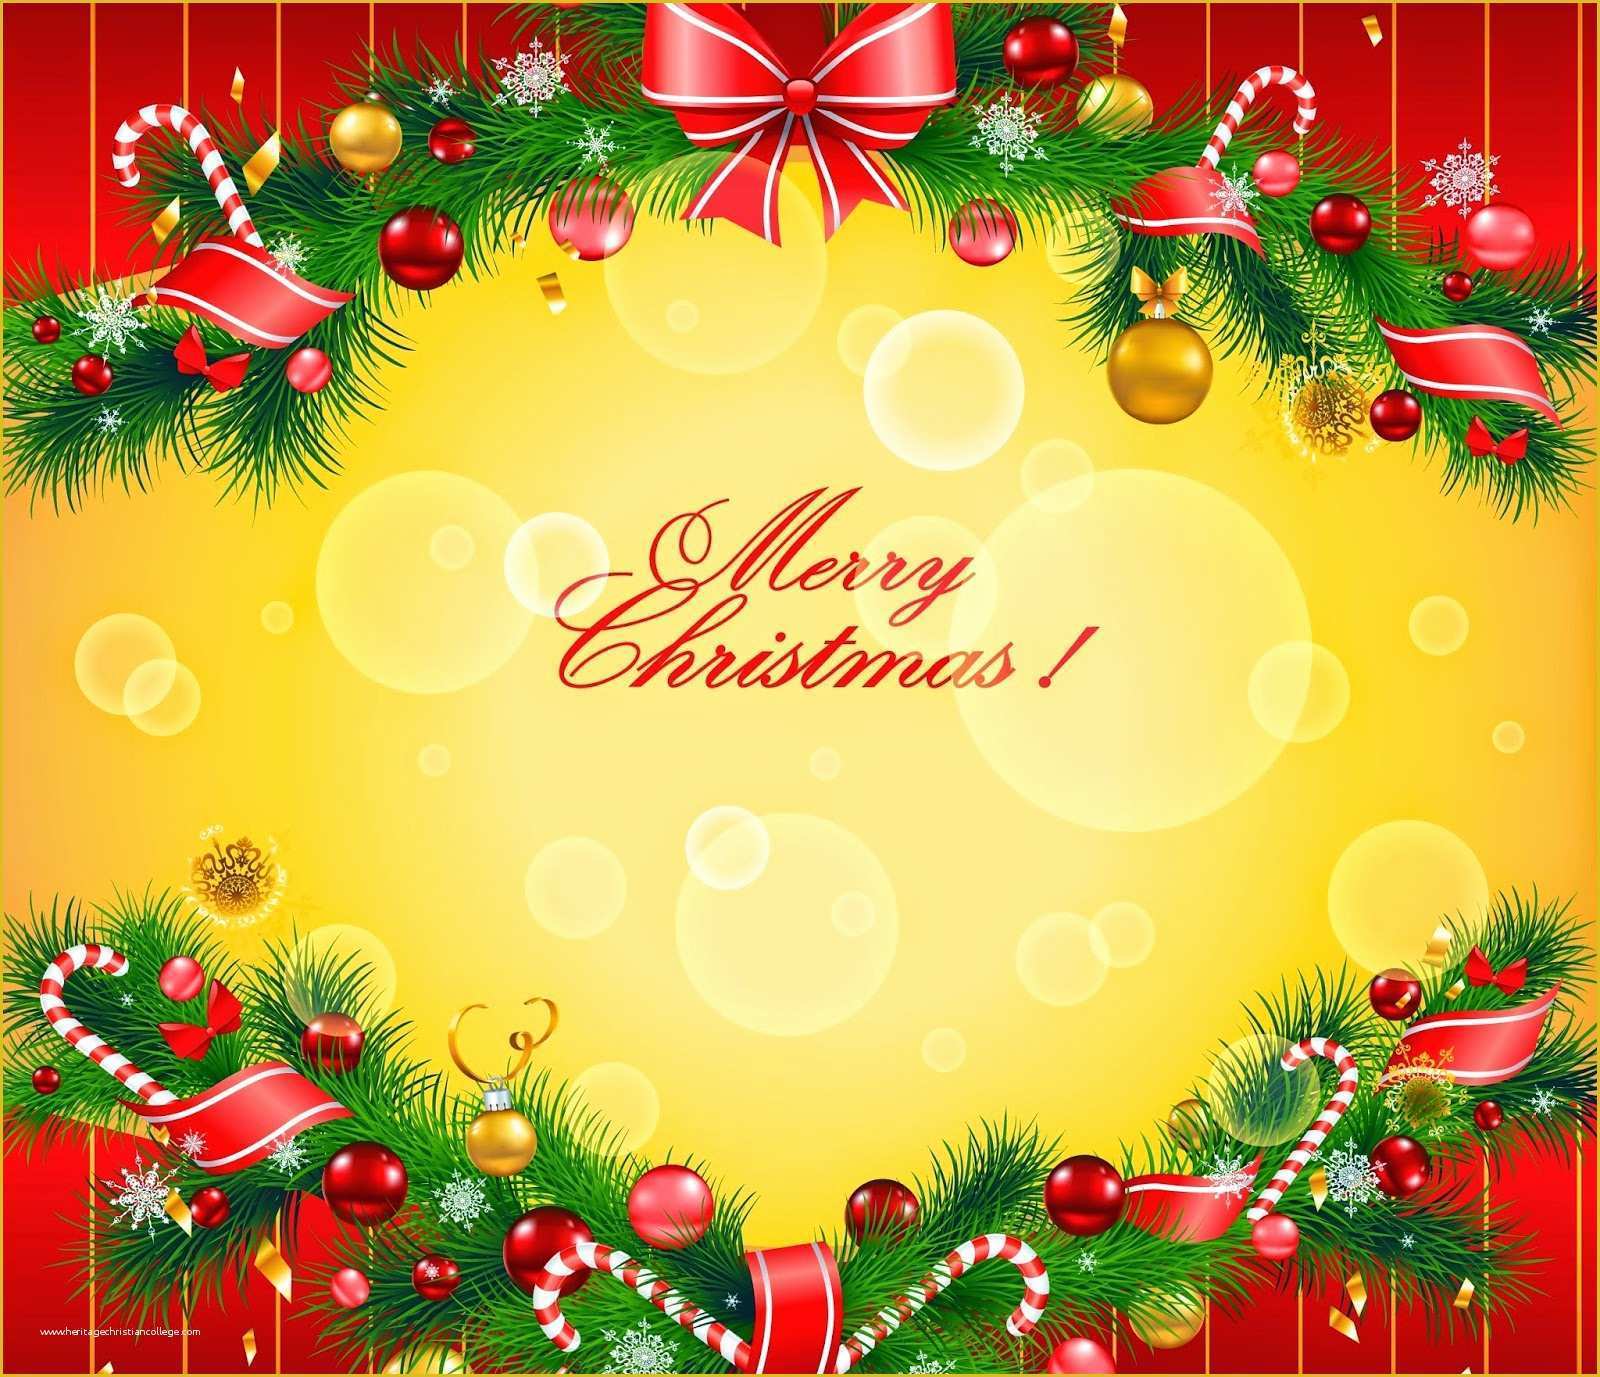 Free Christmas Greeting Card Templates Of Merry Christmas Greeting Card Hd Images Free